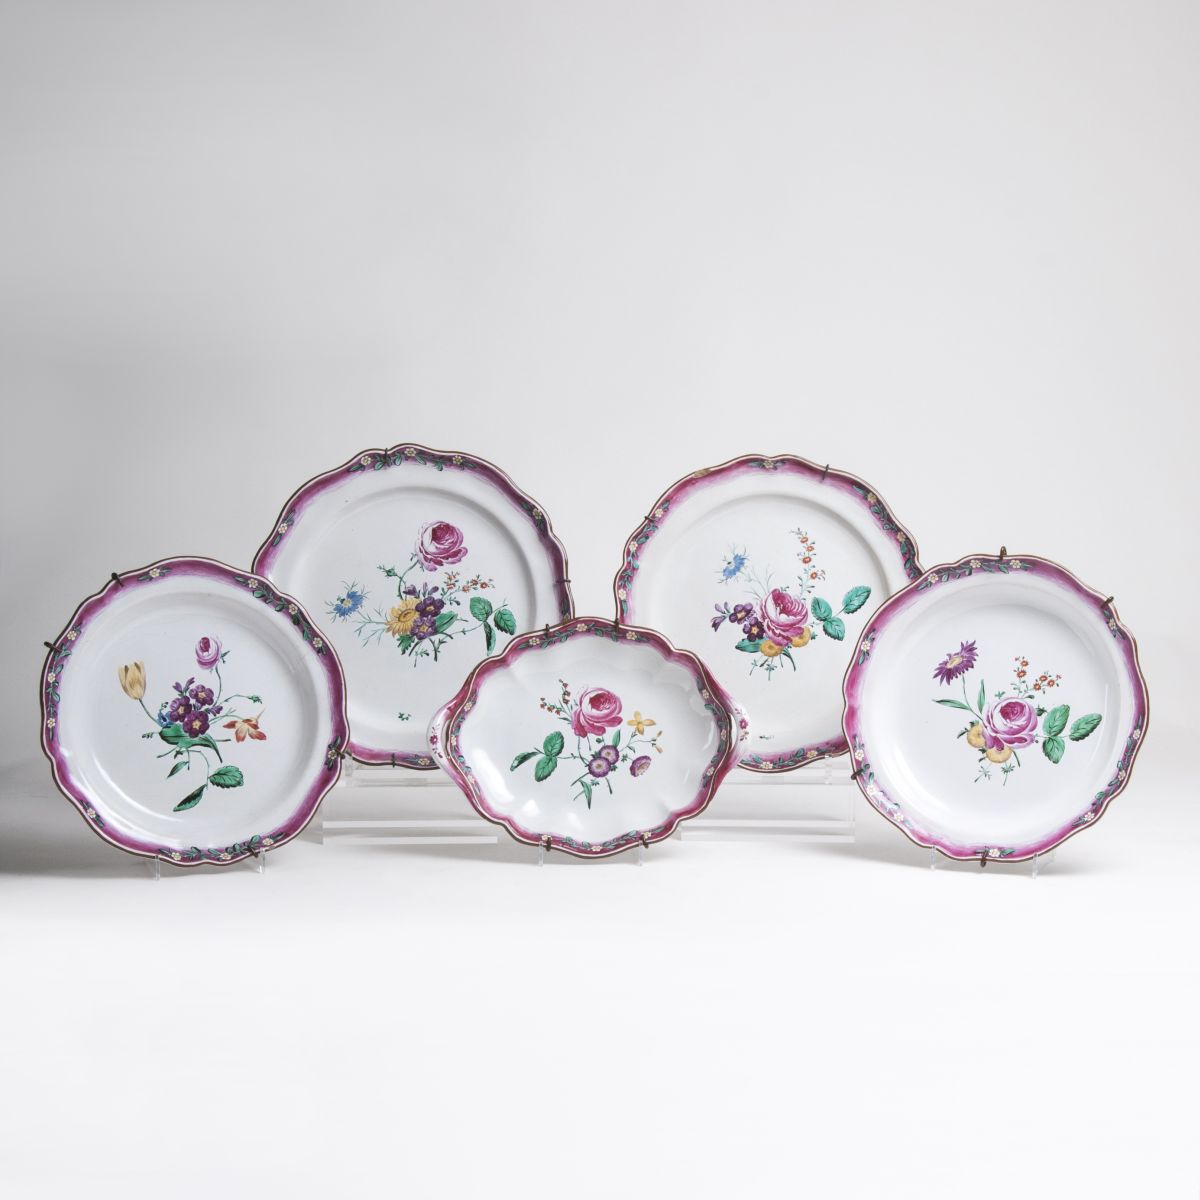 A rare set of four faience plates and an oval dish